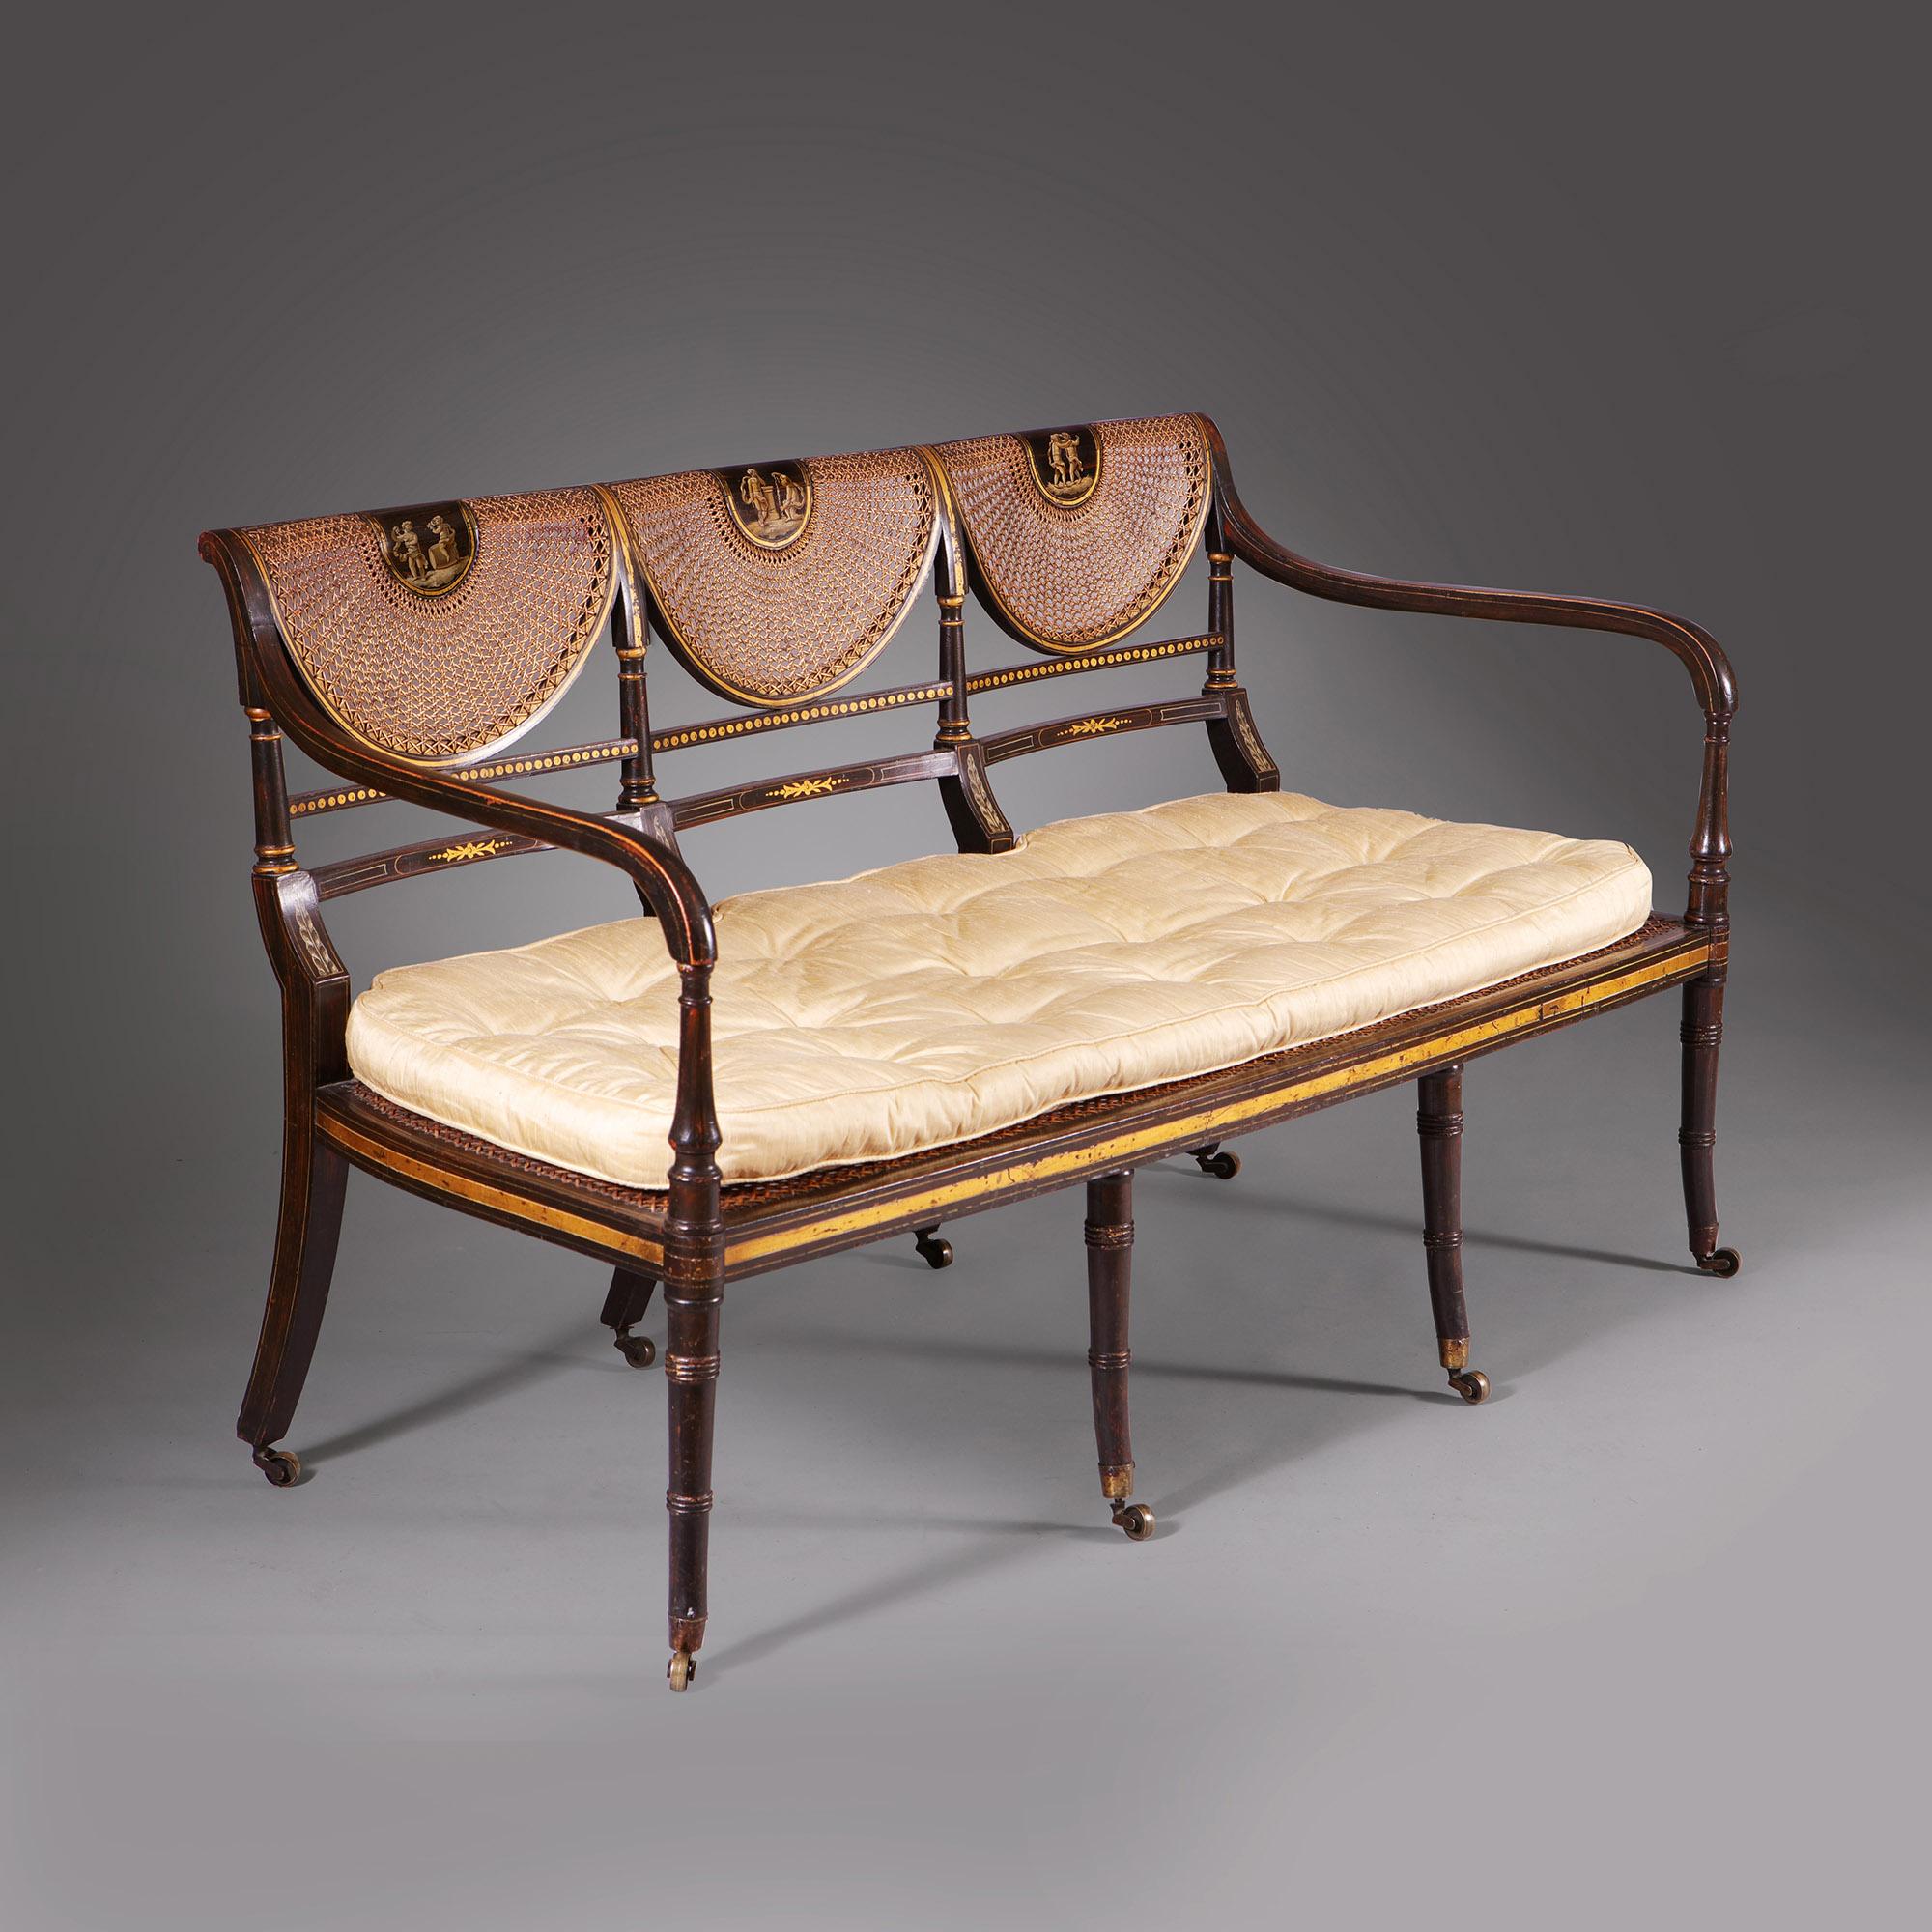 A particularly fine English Thomas Sheraton period simulated rosewood and gilt decorated settee. Circa 1800 England.

The finely decorated settee is in the most remarkable original condition, including all of the original decoration, gilding, cane